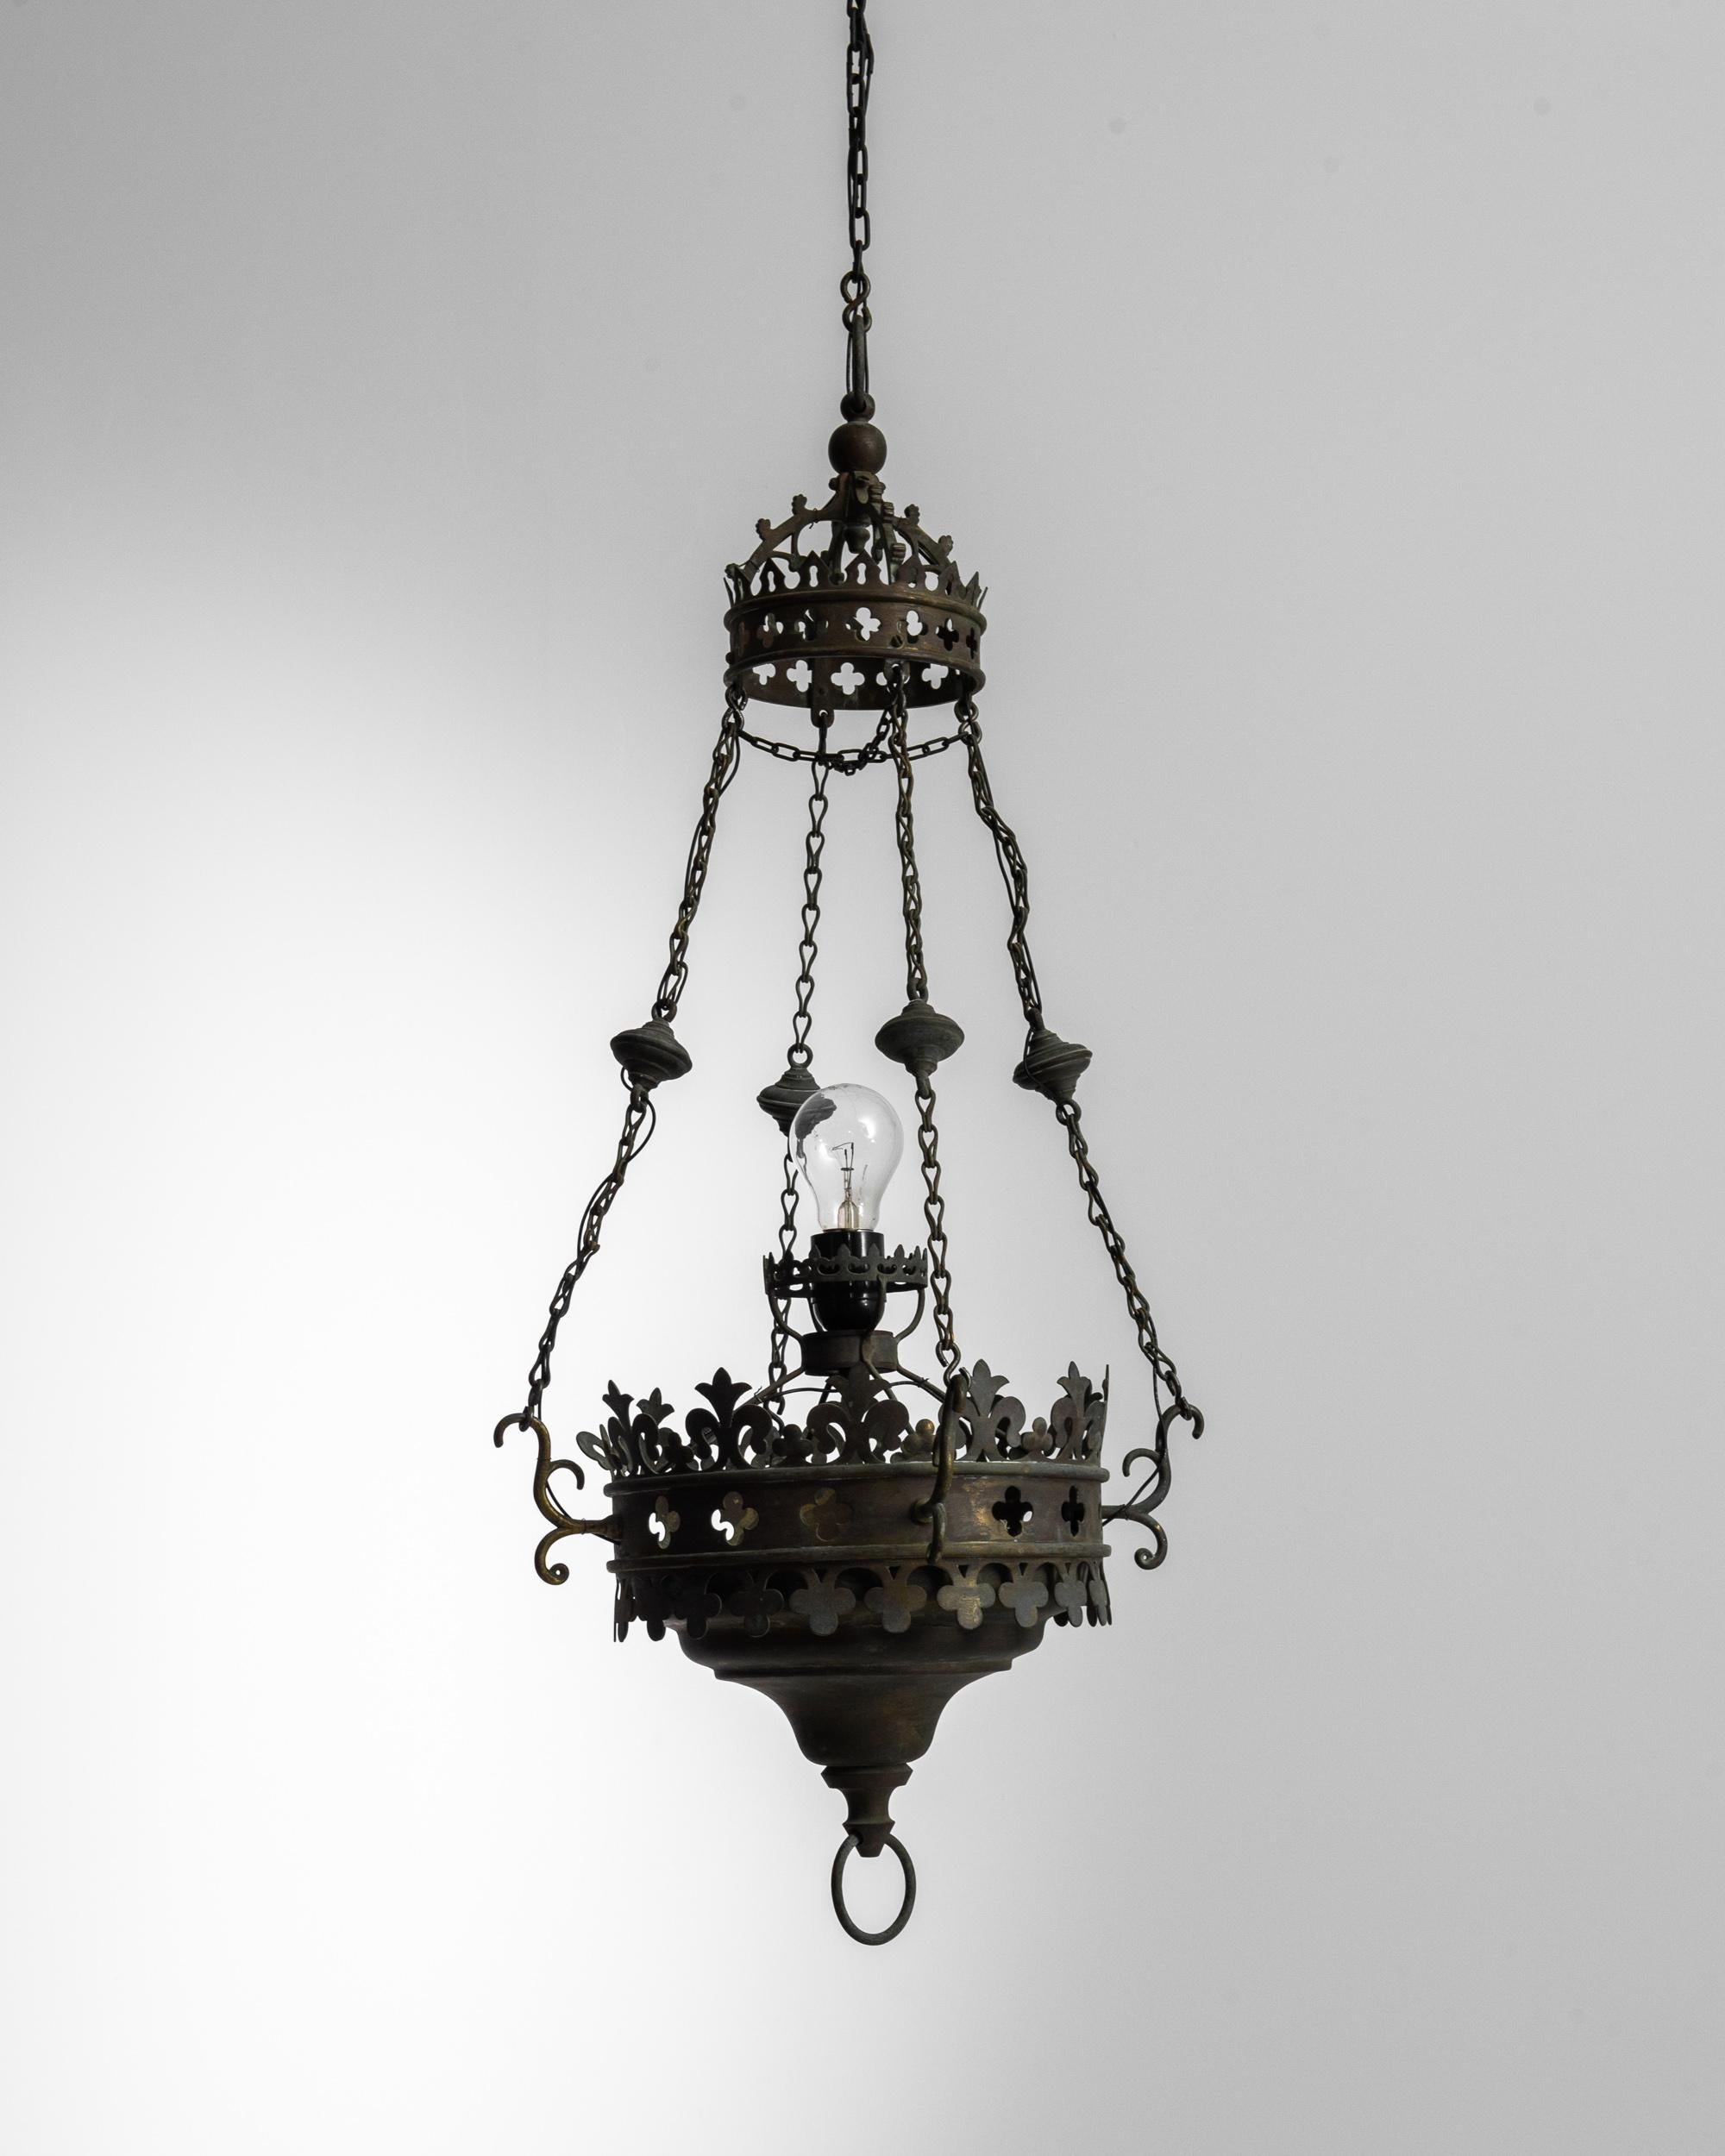 This vintage metal chandelier lends a note of gothic glamor to your space. Made in France in the 1900s, a design of coiling brass scrolls and decorative ornaments— evocative details which gift this piece a darkly flamboyant personality. The crowning